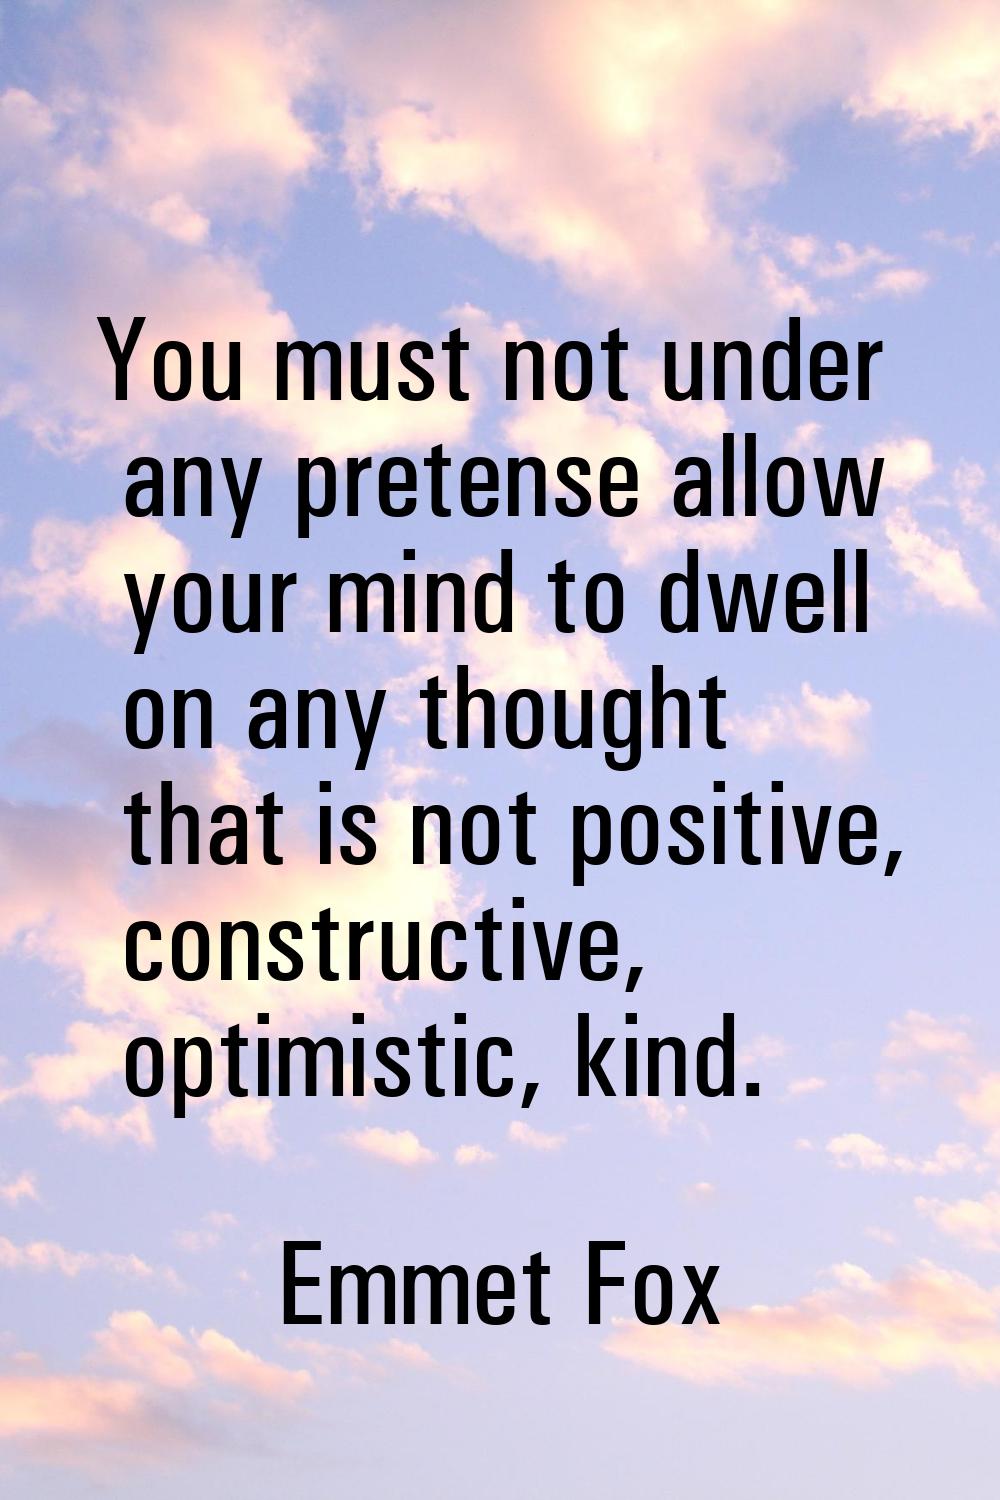 You must not under any pretense allow your mind to dwell on any thought that is not positive, const